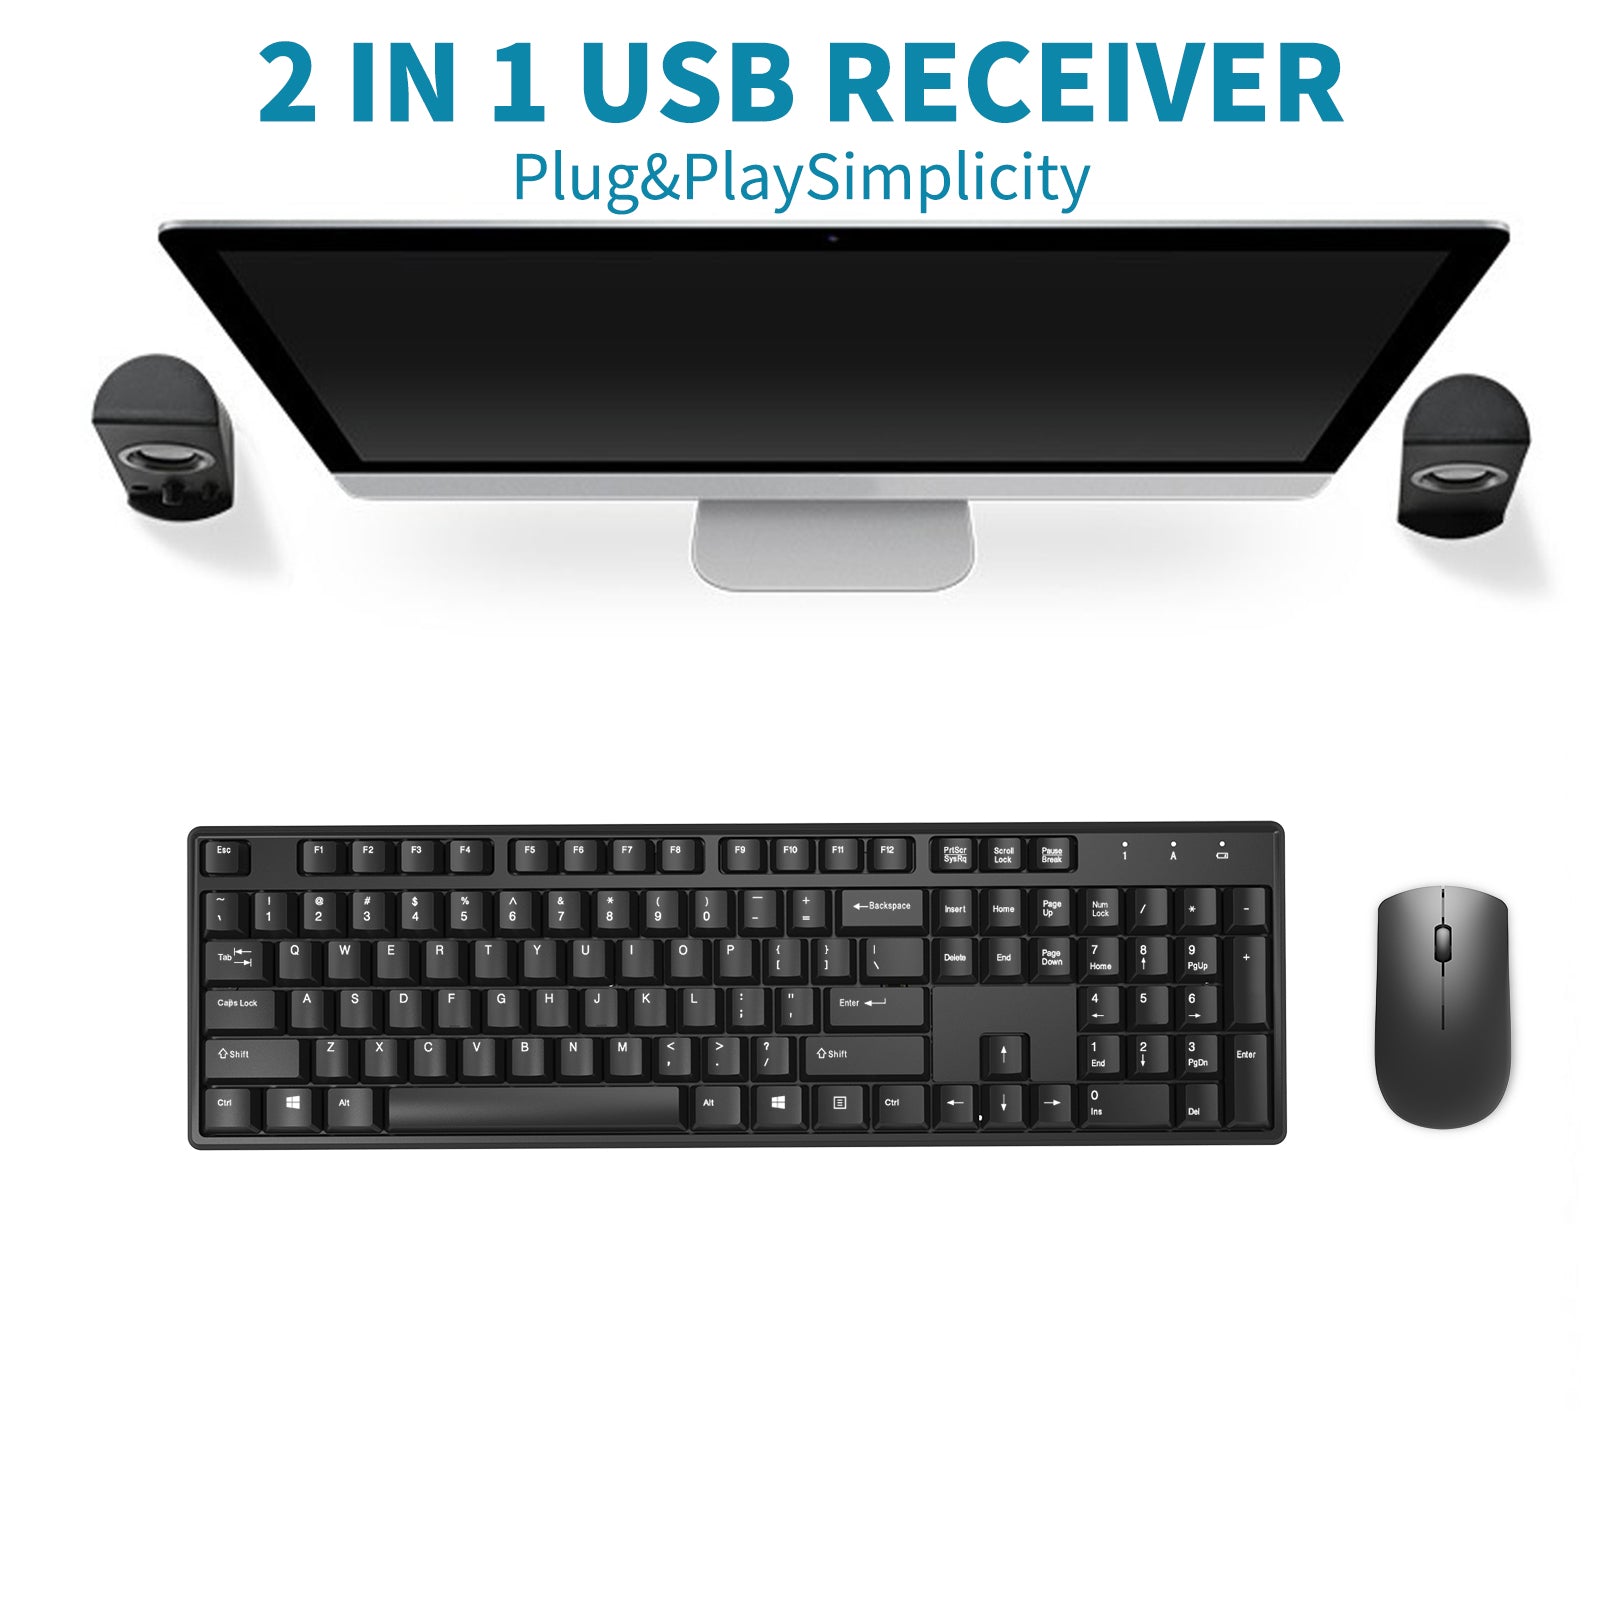 Giecy Wireless Keyboard and Mouse Combo 2.4G Wireless Full Size Slim Keyboard, Low Power Mouse and Keyboard Ergonomic，for Windows PC, Laptop - Black